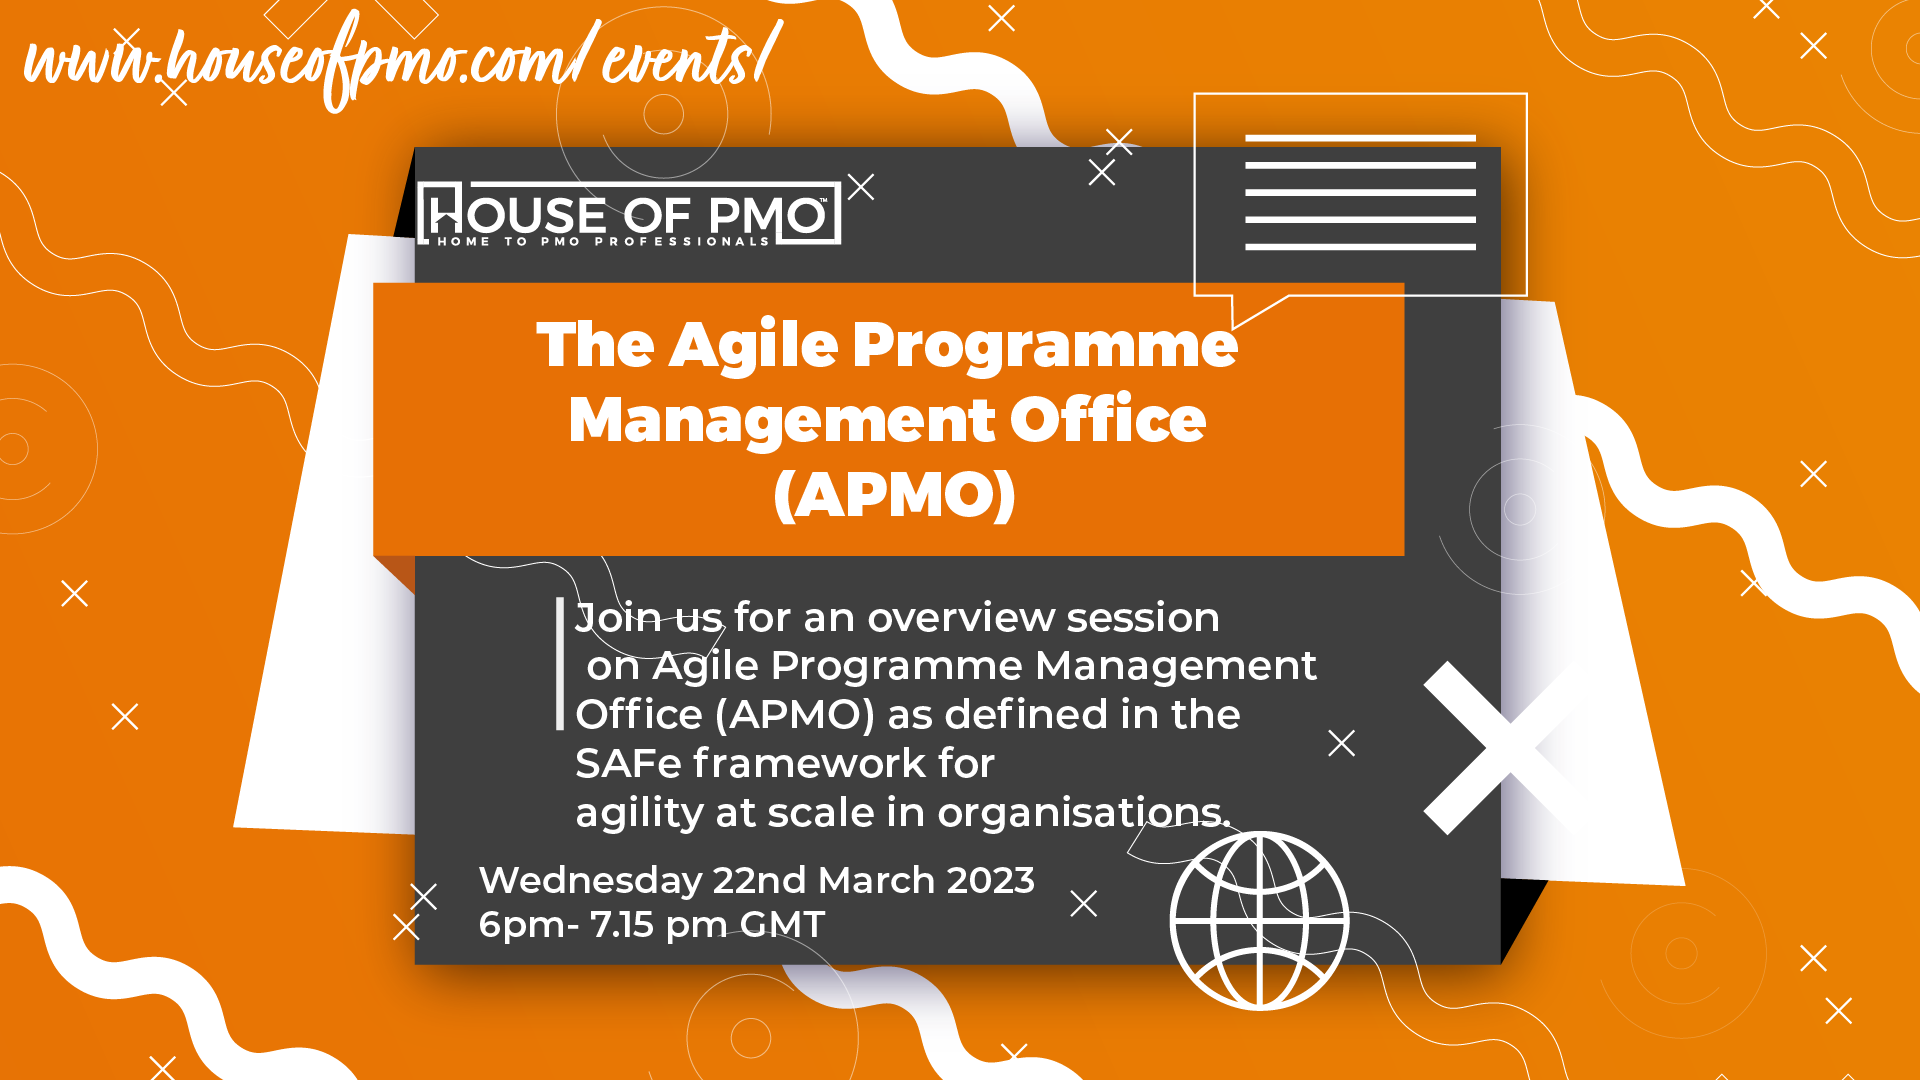 image for the event The Agile Programme Management Office (APMO)